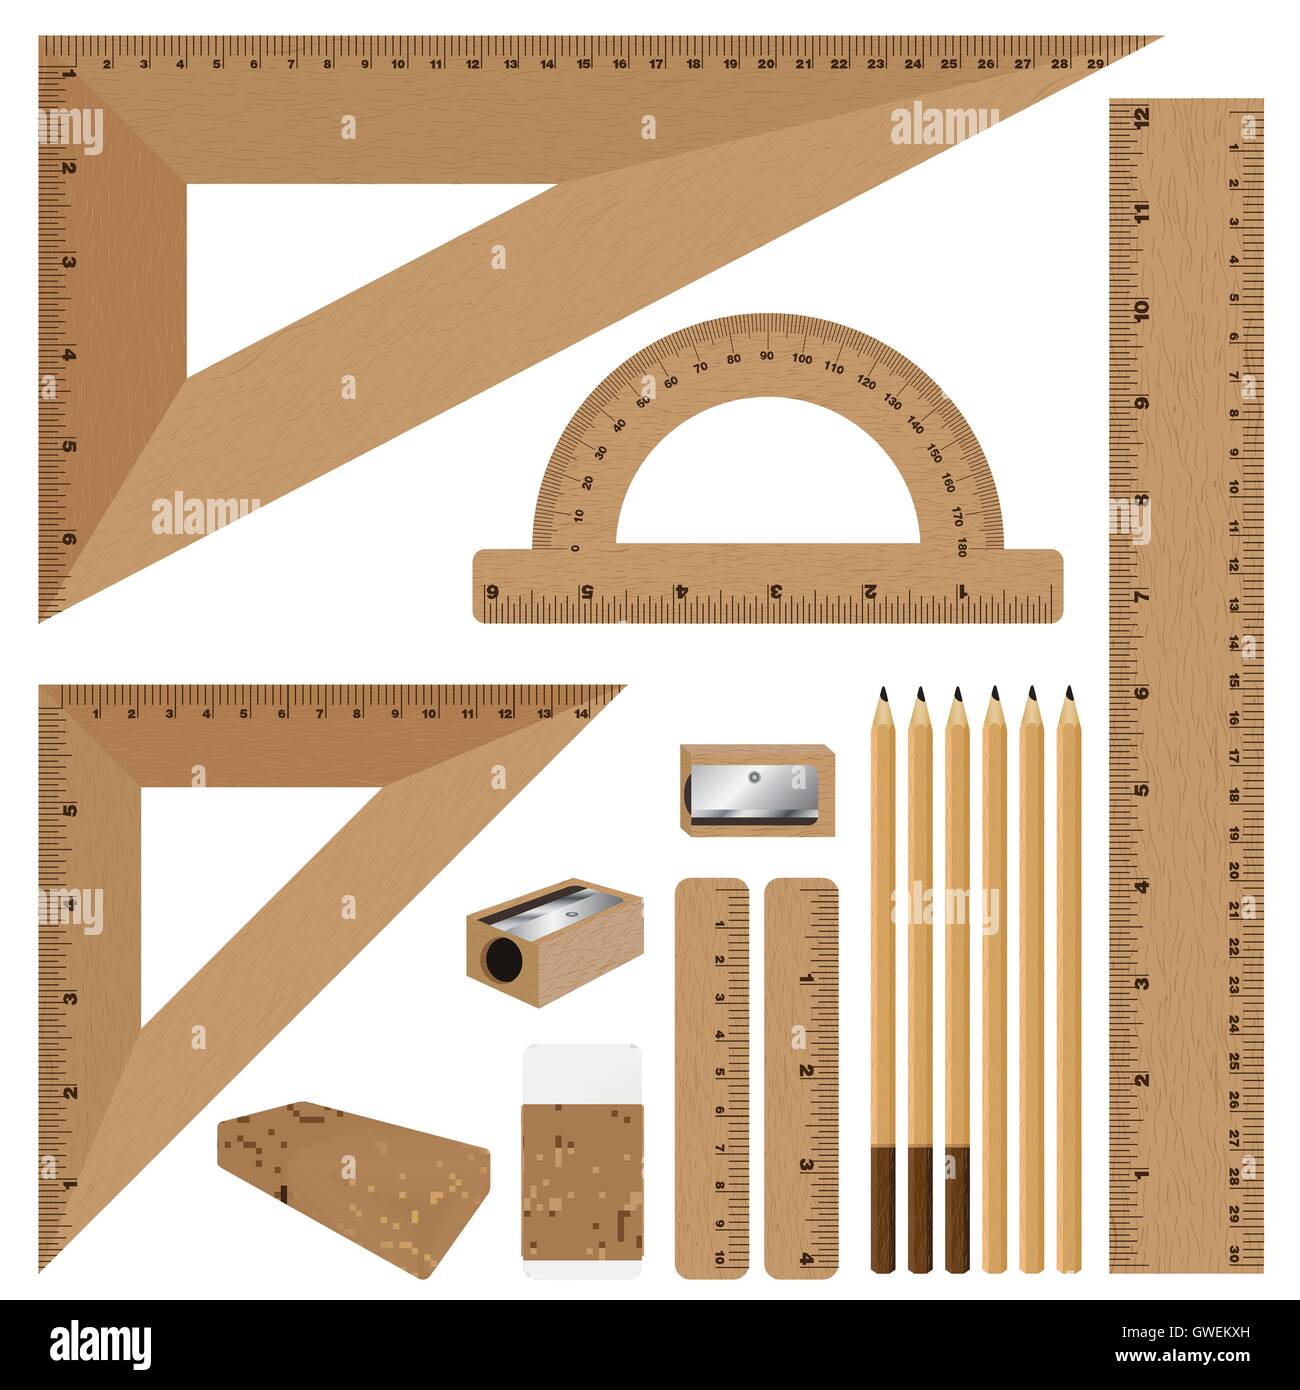 pencil, vector, school, painting, illustration, wooden, paper, lath, texture, wall, surface, vintage, old, brown, retro Stock Vector